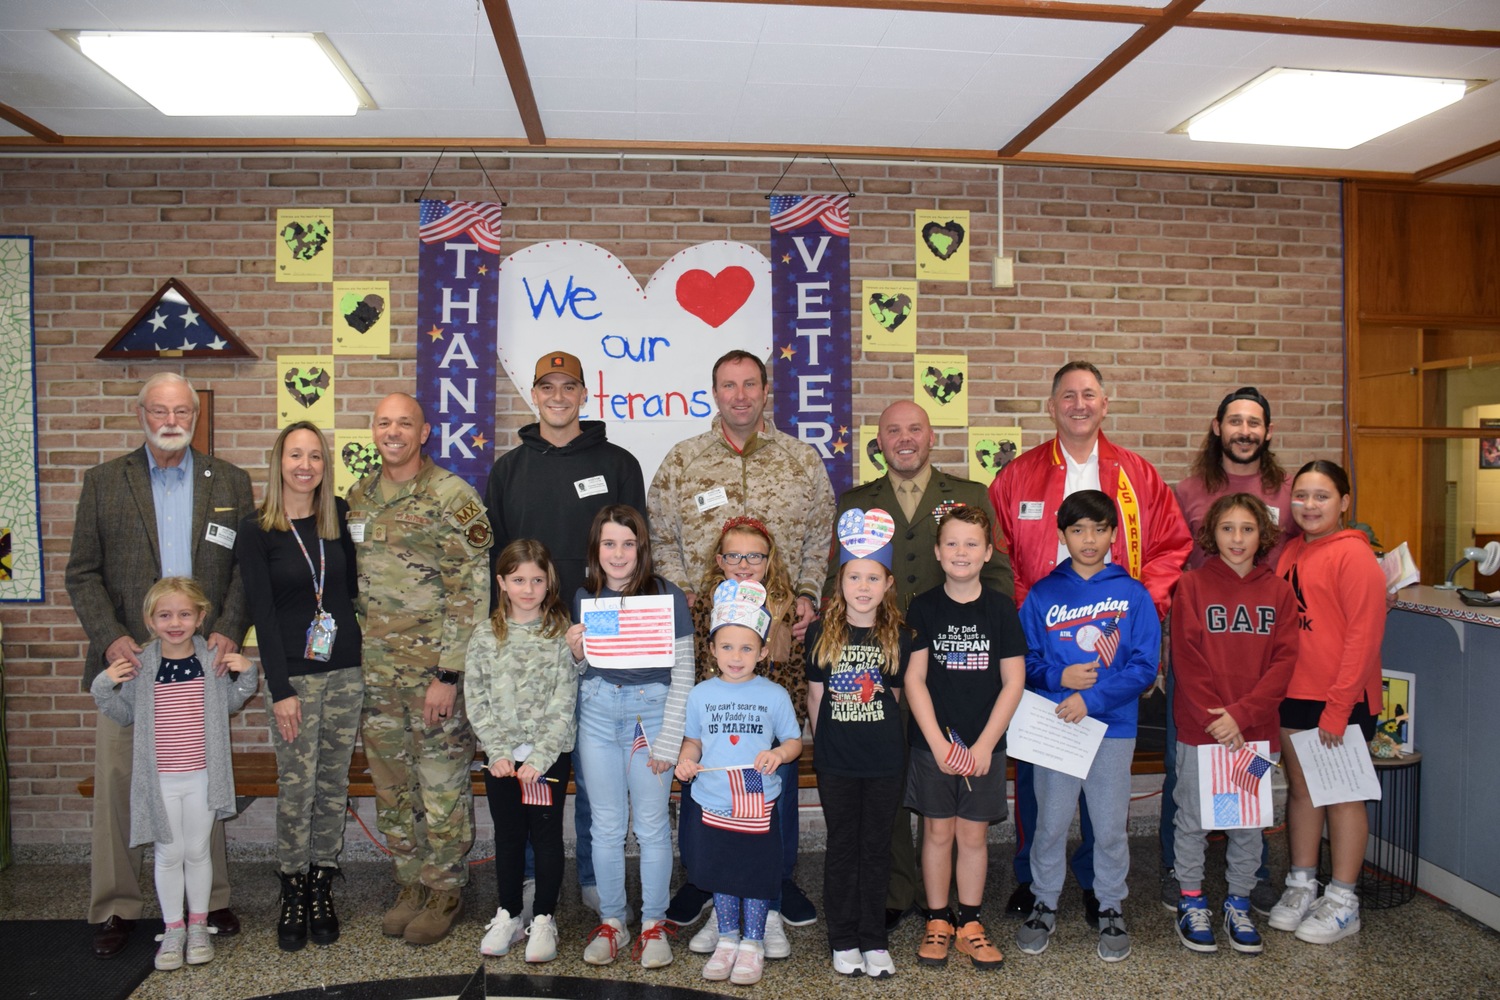 Westhampton Beach Elementary School paid tribute to local veterans on November 9, during which students learned about the history of
Veterans Day, met 14 local veterans from all branches of the military and heard from guest
speaker Sr. Master Sgt. Jonathan Mazura. To culminate the ceremony, students sang “Proud
of Our Veterans.” Additionally, in honoring local veterans for Veterans Day, Westhampton Beach High School students in U.S. history classes met with and heard from members of the VFW Post 5350. The veterans spoke to the students about their respective careers in the military. COURTESY WESTHAMPTON BEACH SCHOOL DISTRICT